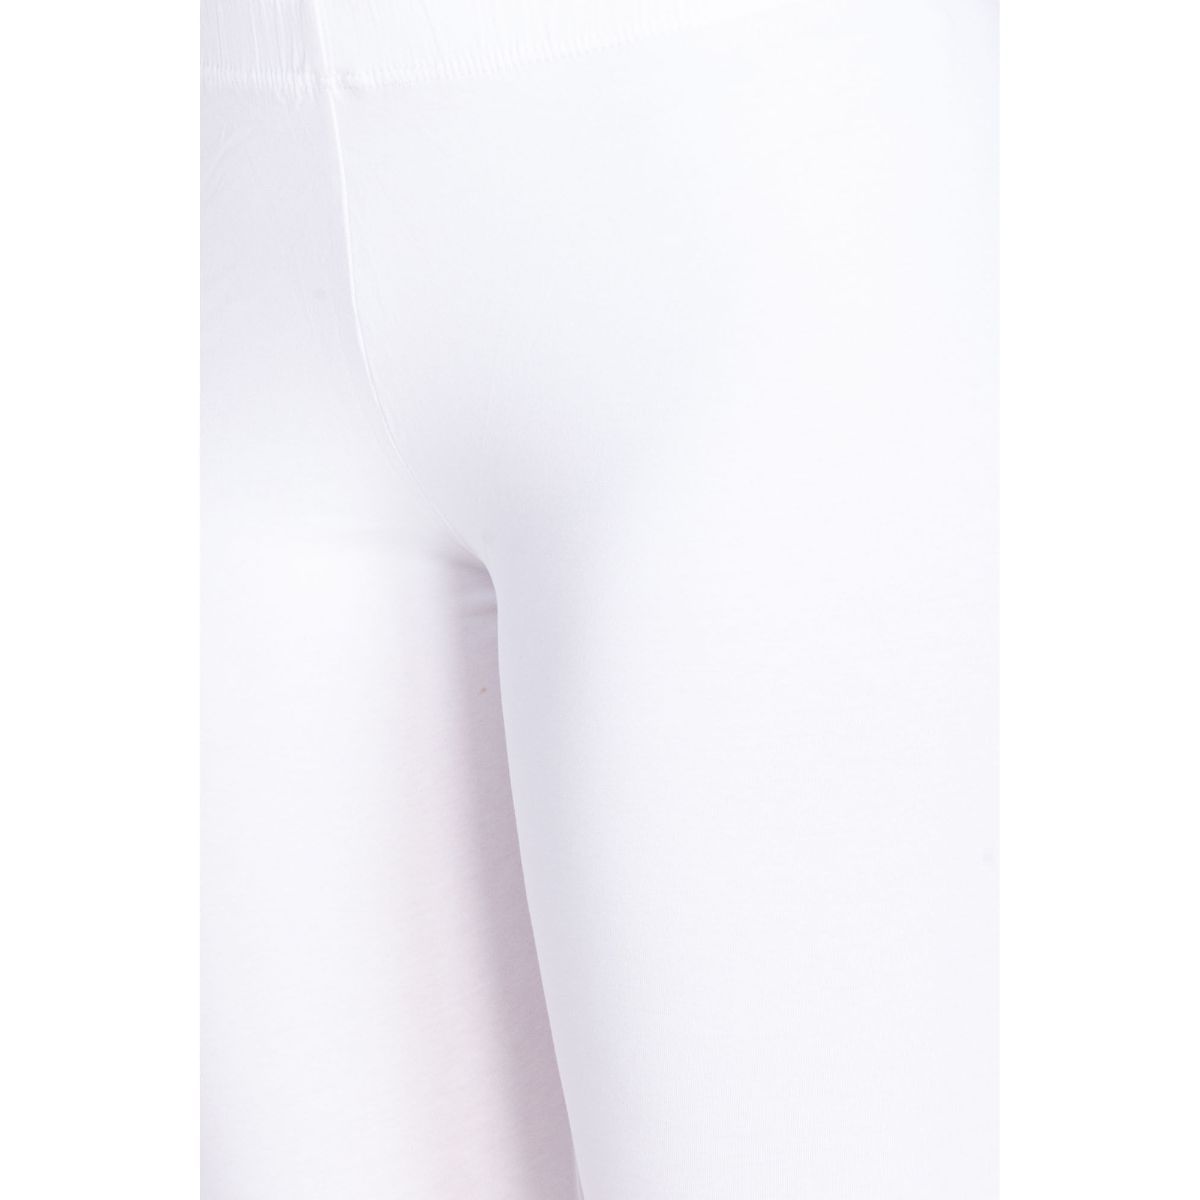 LUX Lyra Cotton Stretchable Full length Churidar Lycra Leggings for women -  White - Frozentags - Ladies Dress Materials